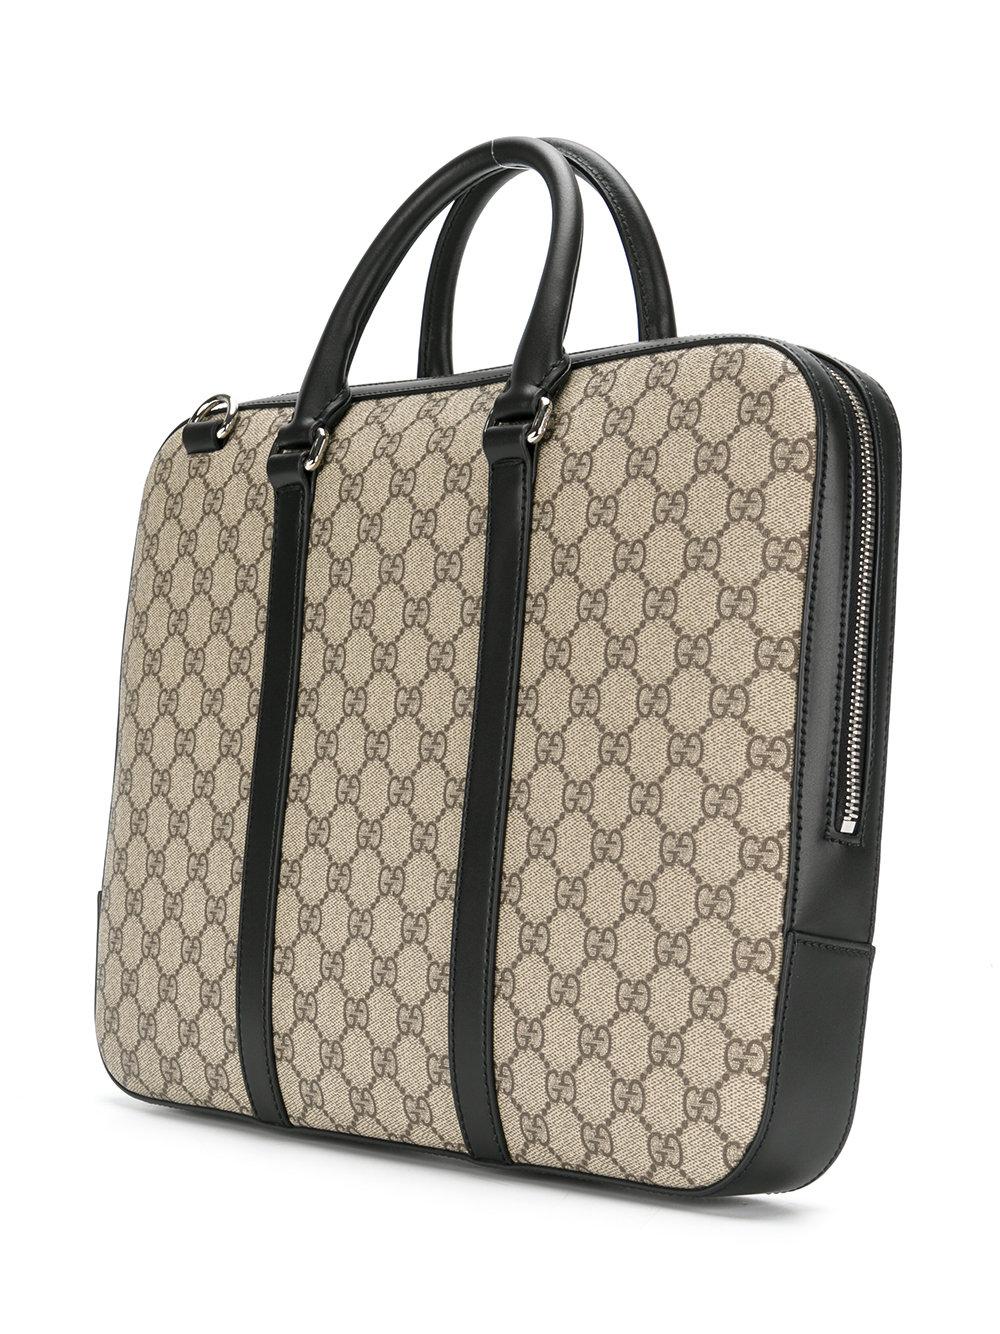 Gucci Leather Gg Supreme Laptop Bag for Men - Lyst